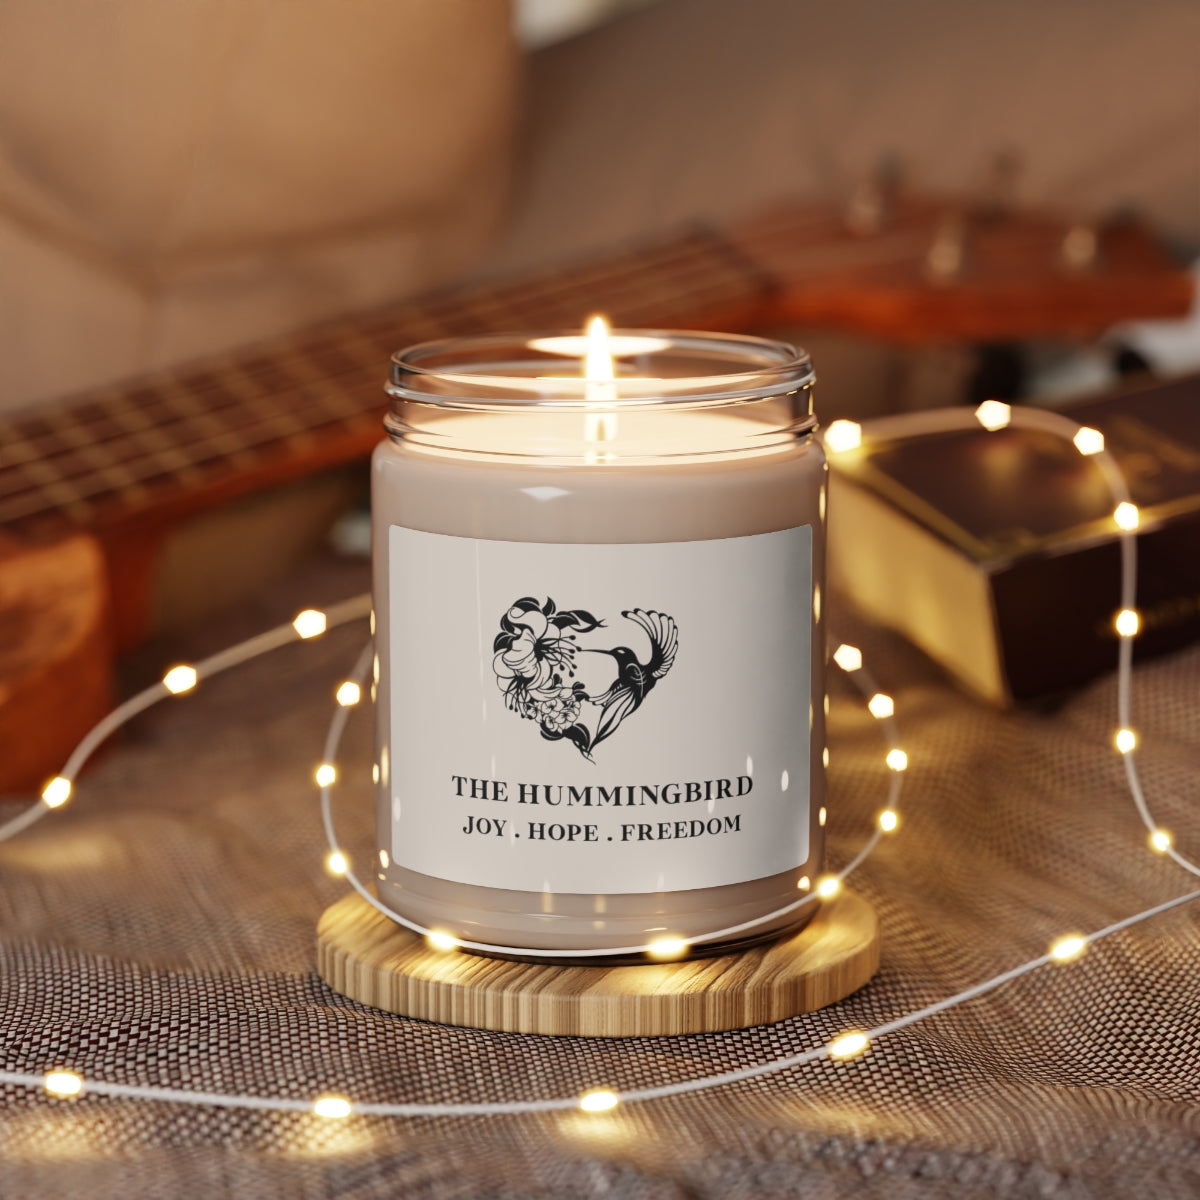 The Hummingbird Scented Candle